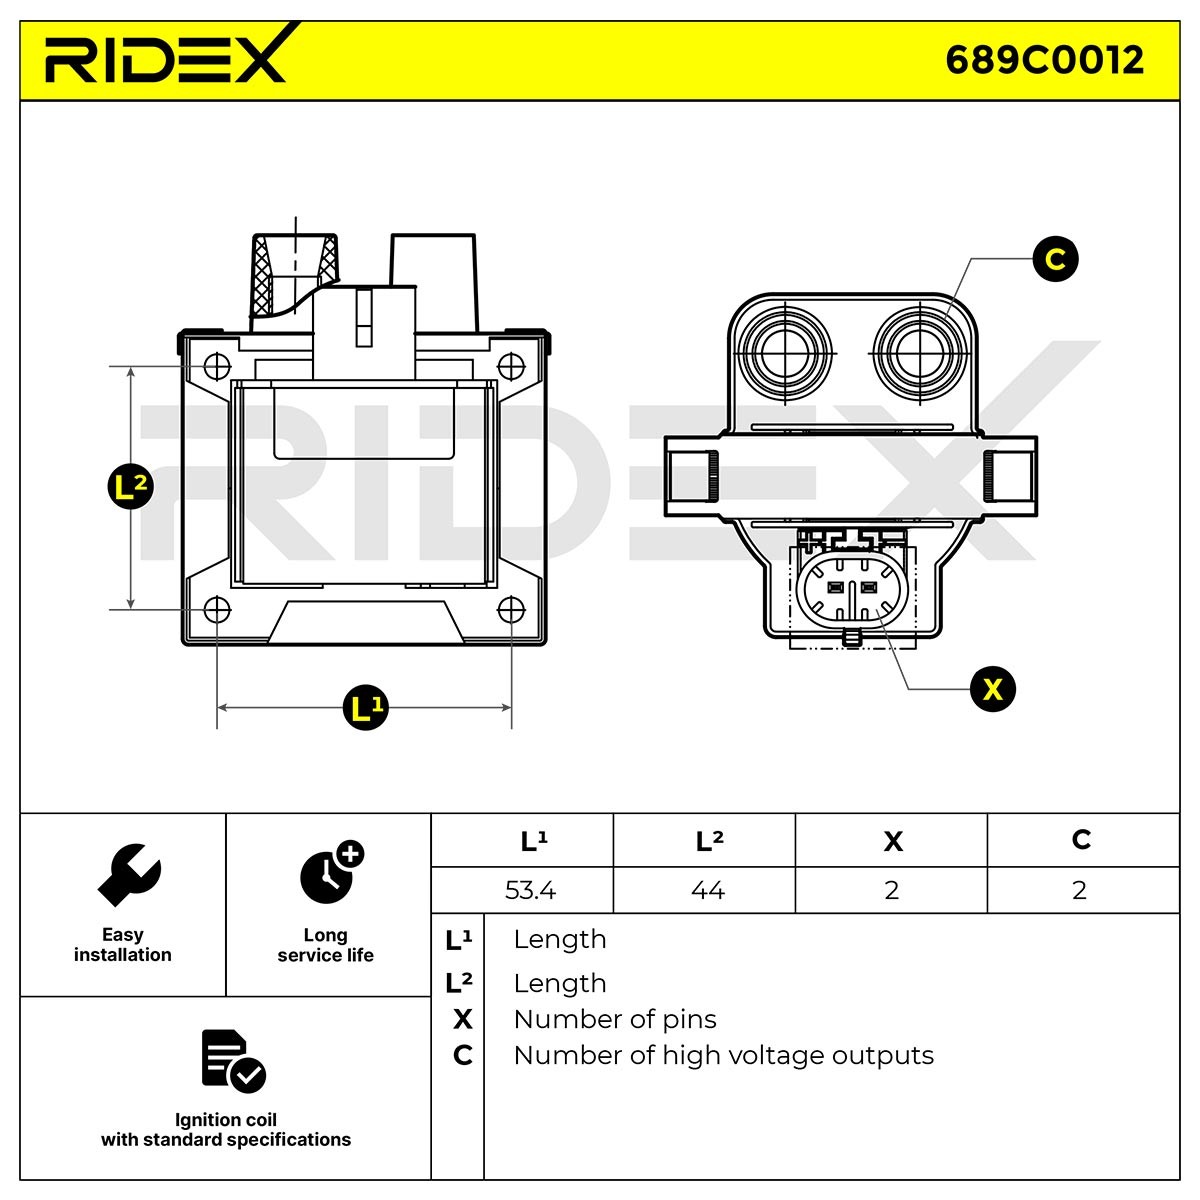 RIDEX 689C0012 Ignition coil pack 2-pin connector, 12V